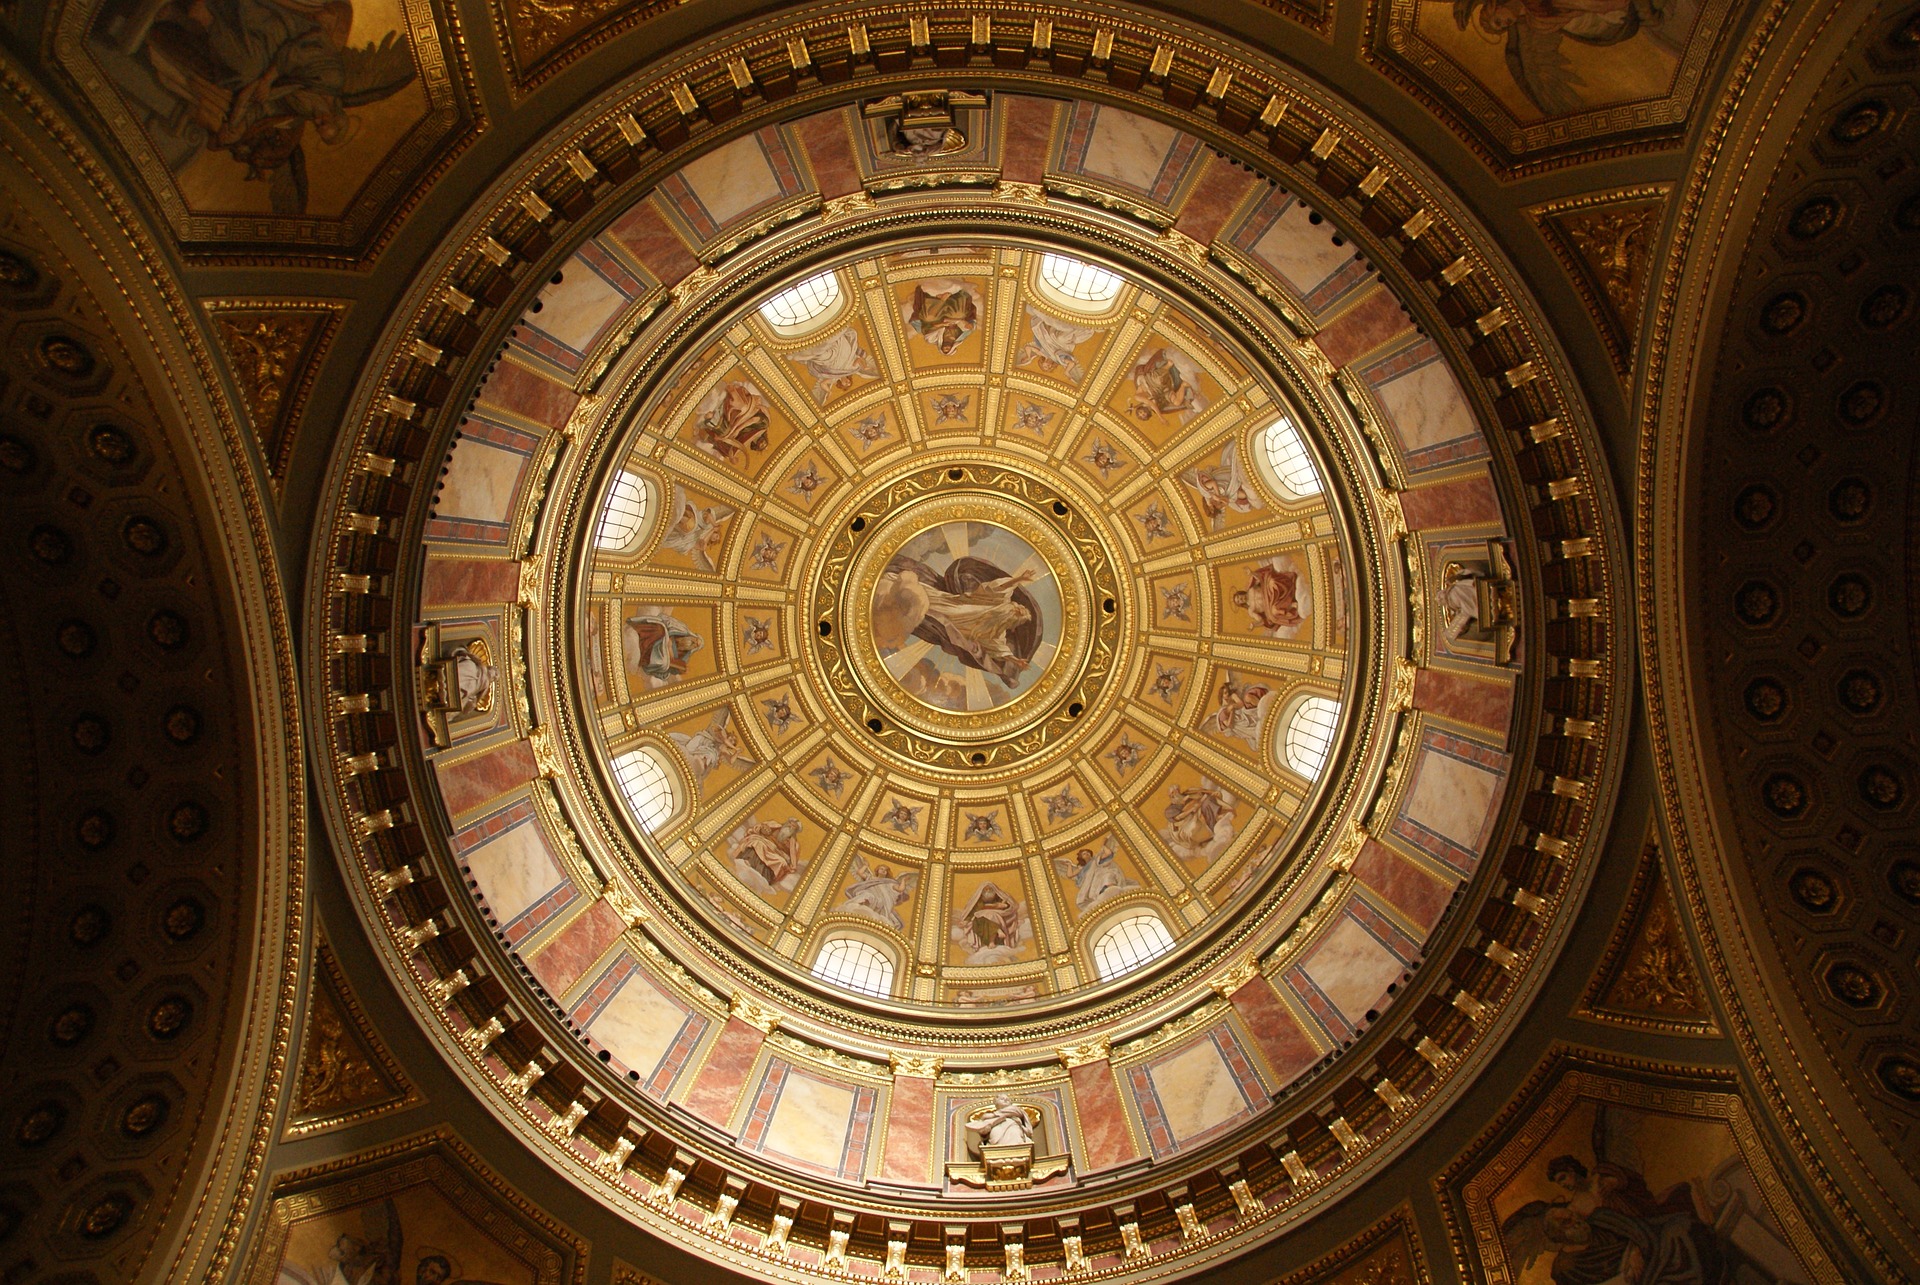 The dome at St. Stephen’s Basilica, Budapest, Hungary